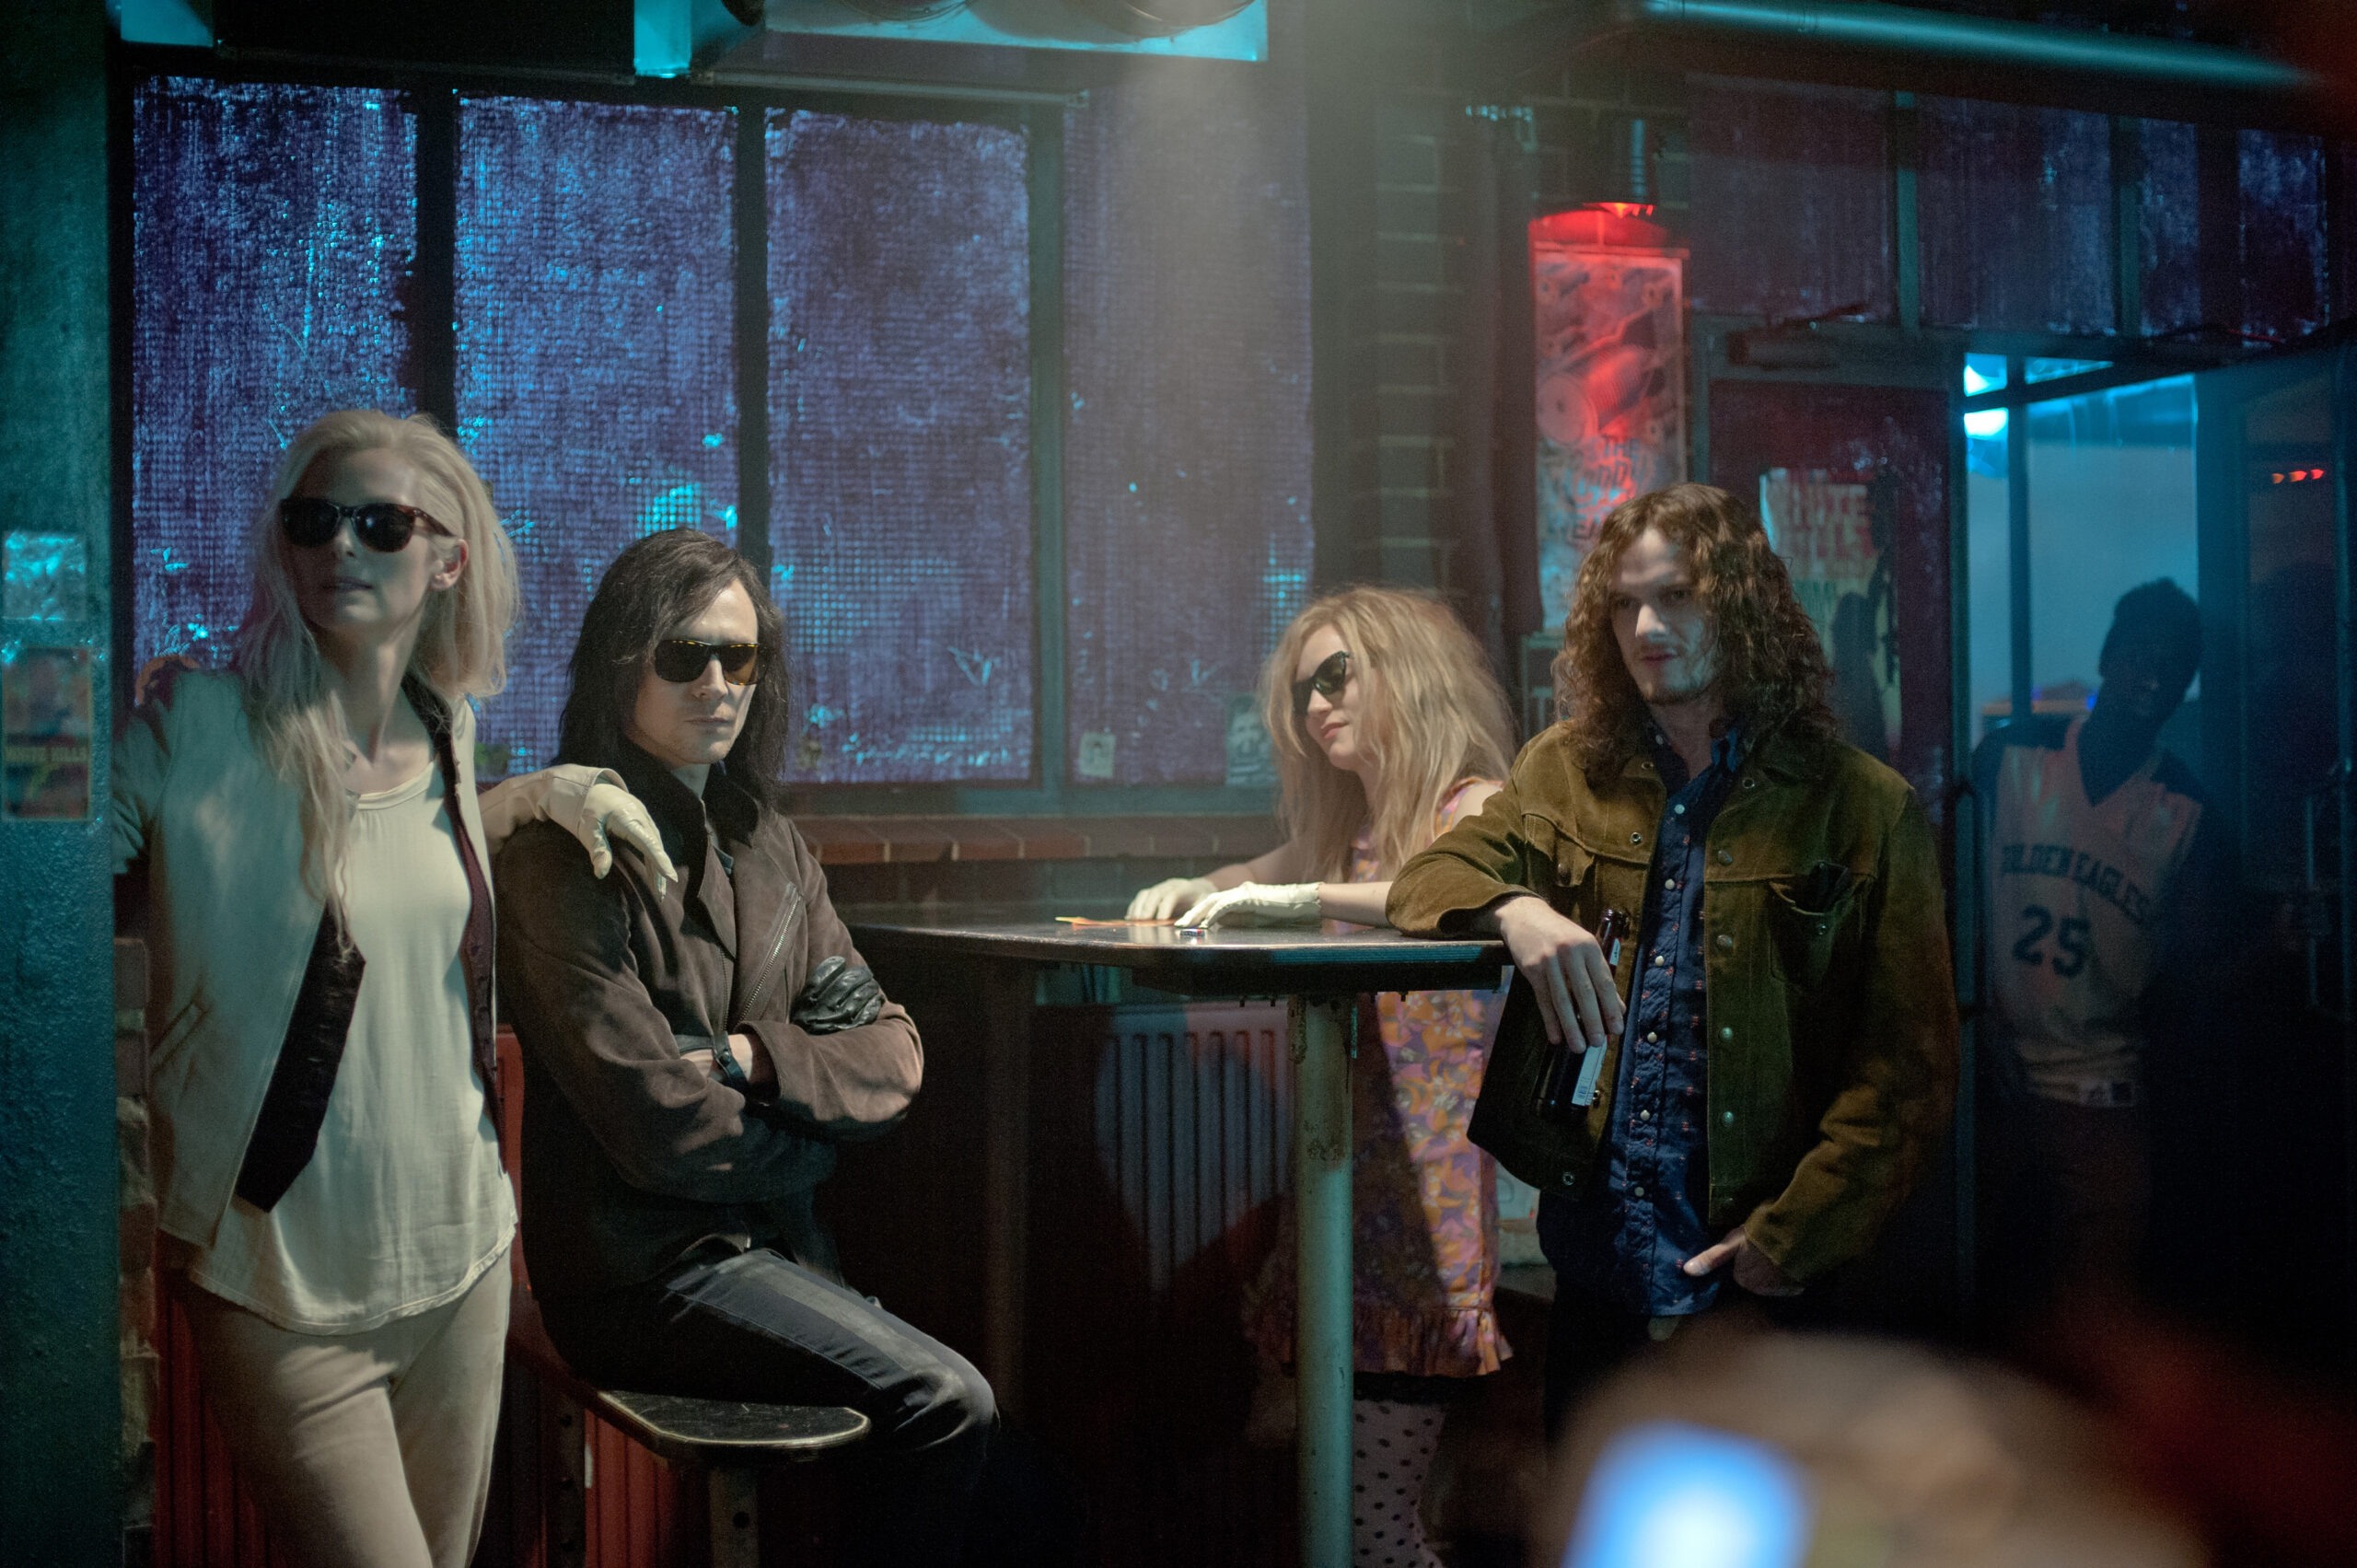 “Solo Los Amantes Sobreviven” (Only Lovers Left Alive, 2014)